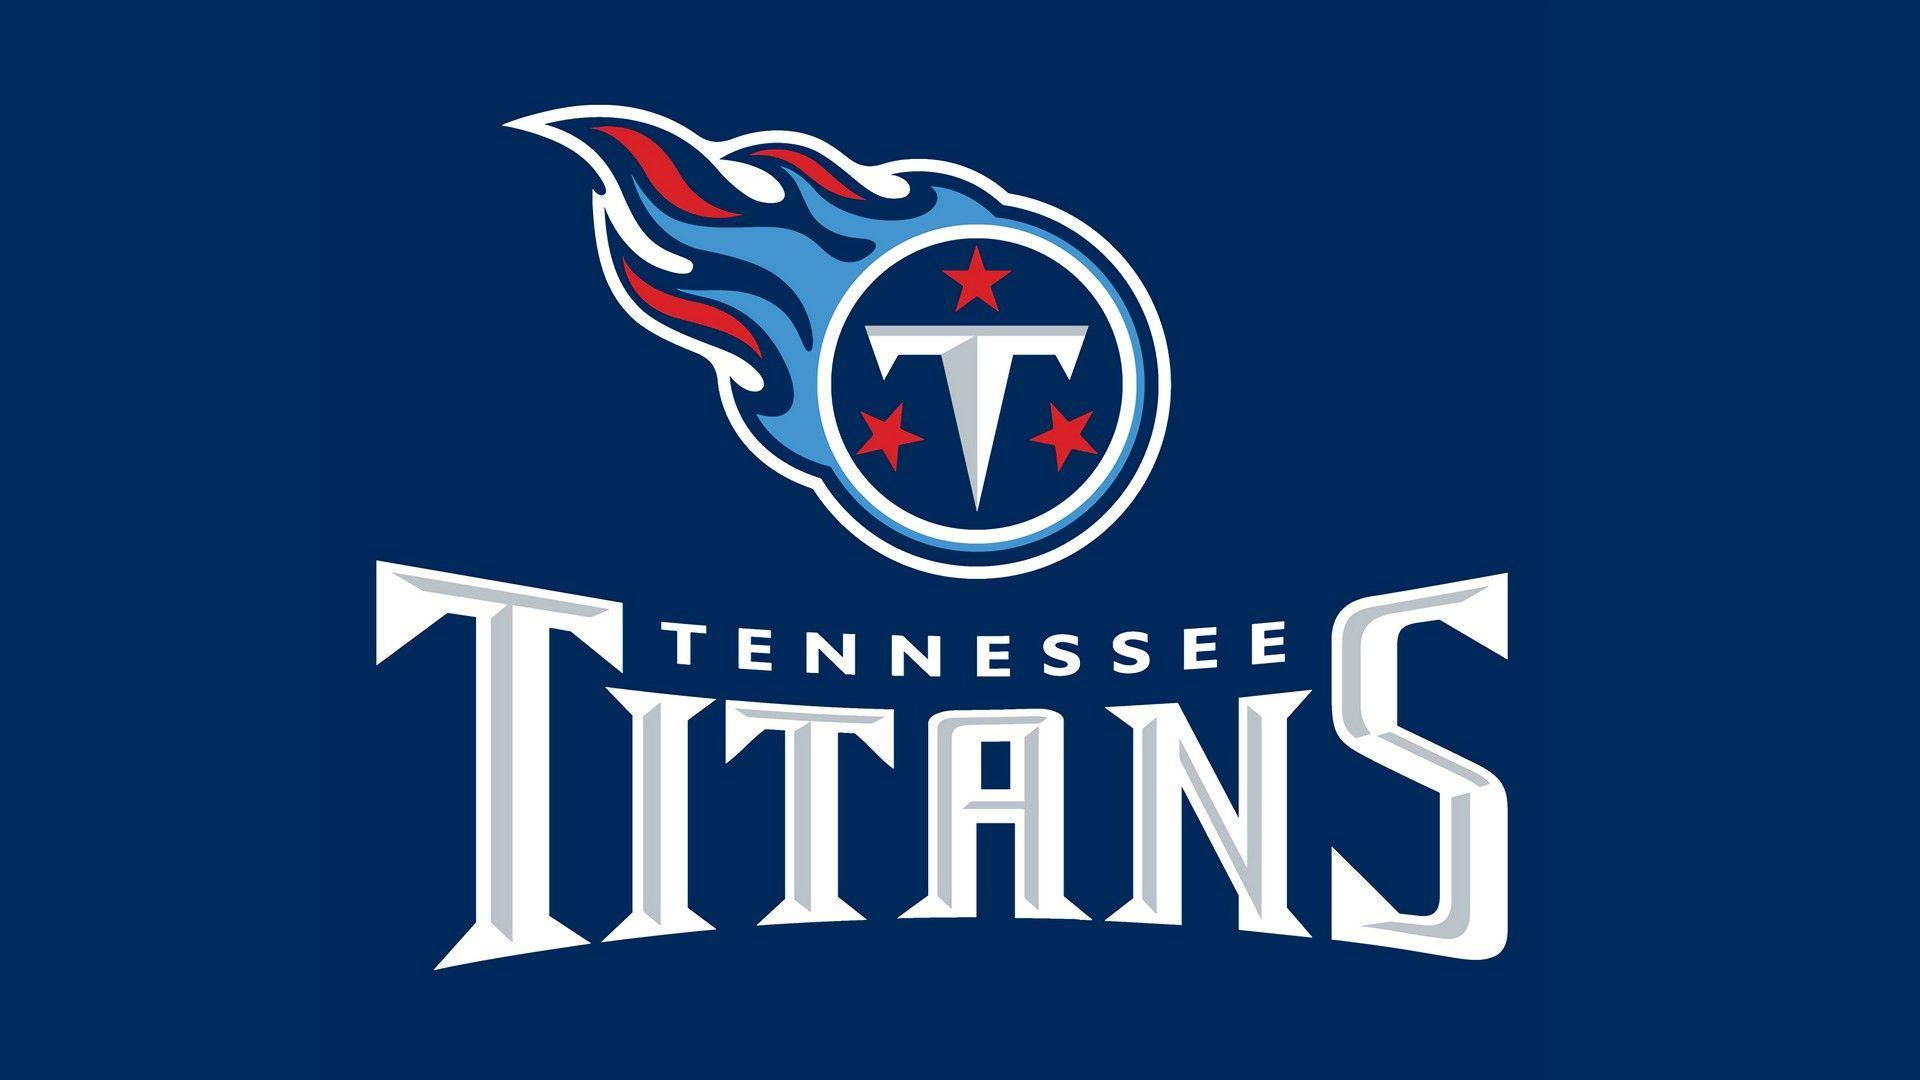 Tennessee Titans With Wordmark Wallpaper